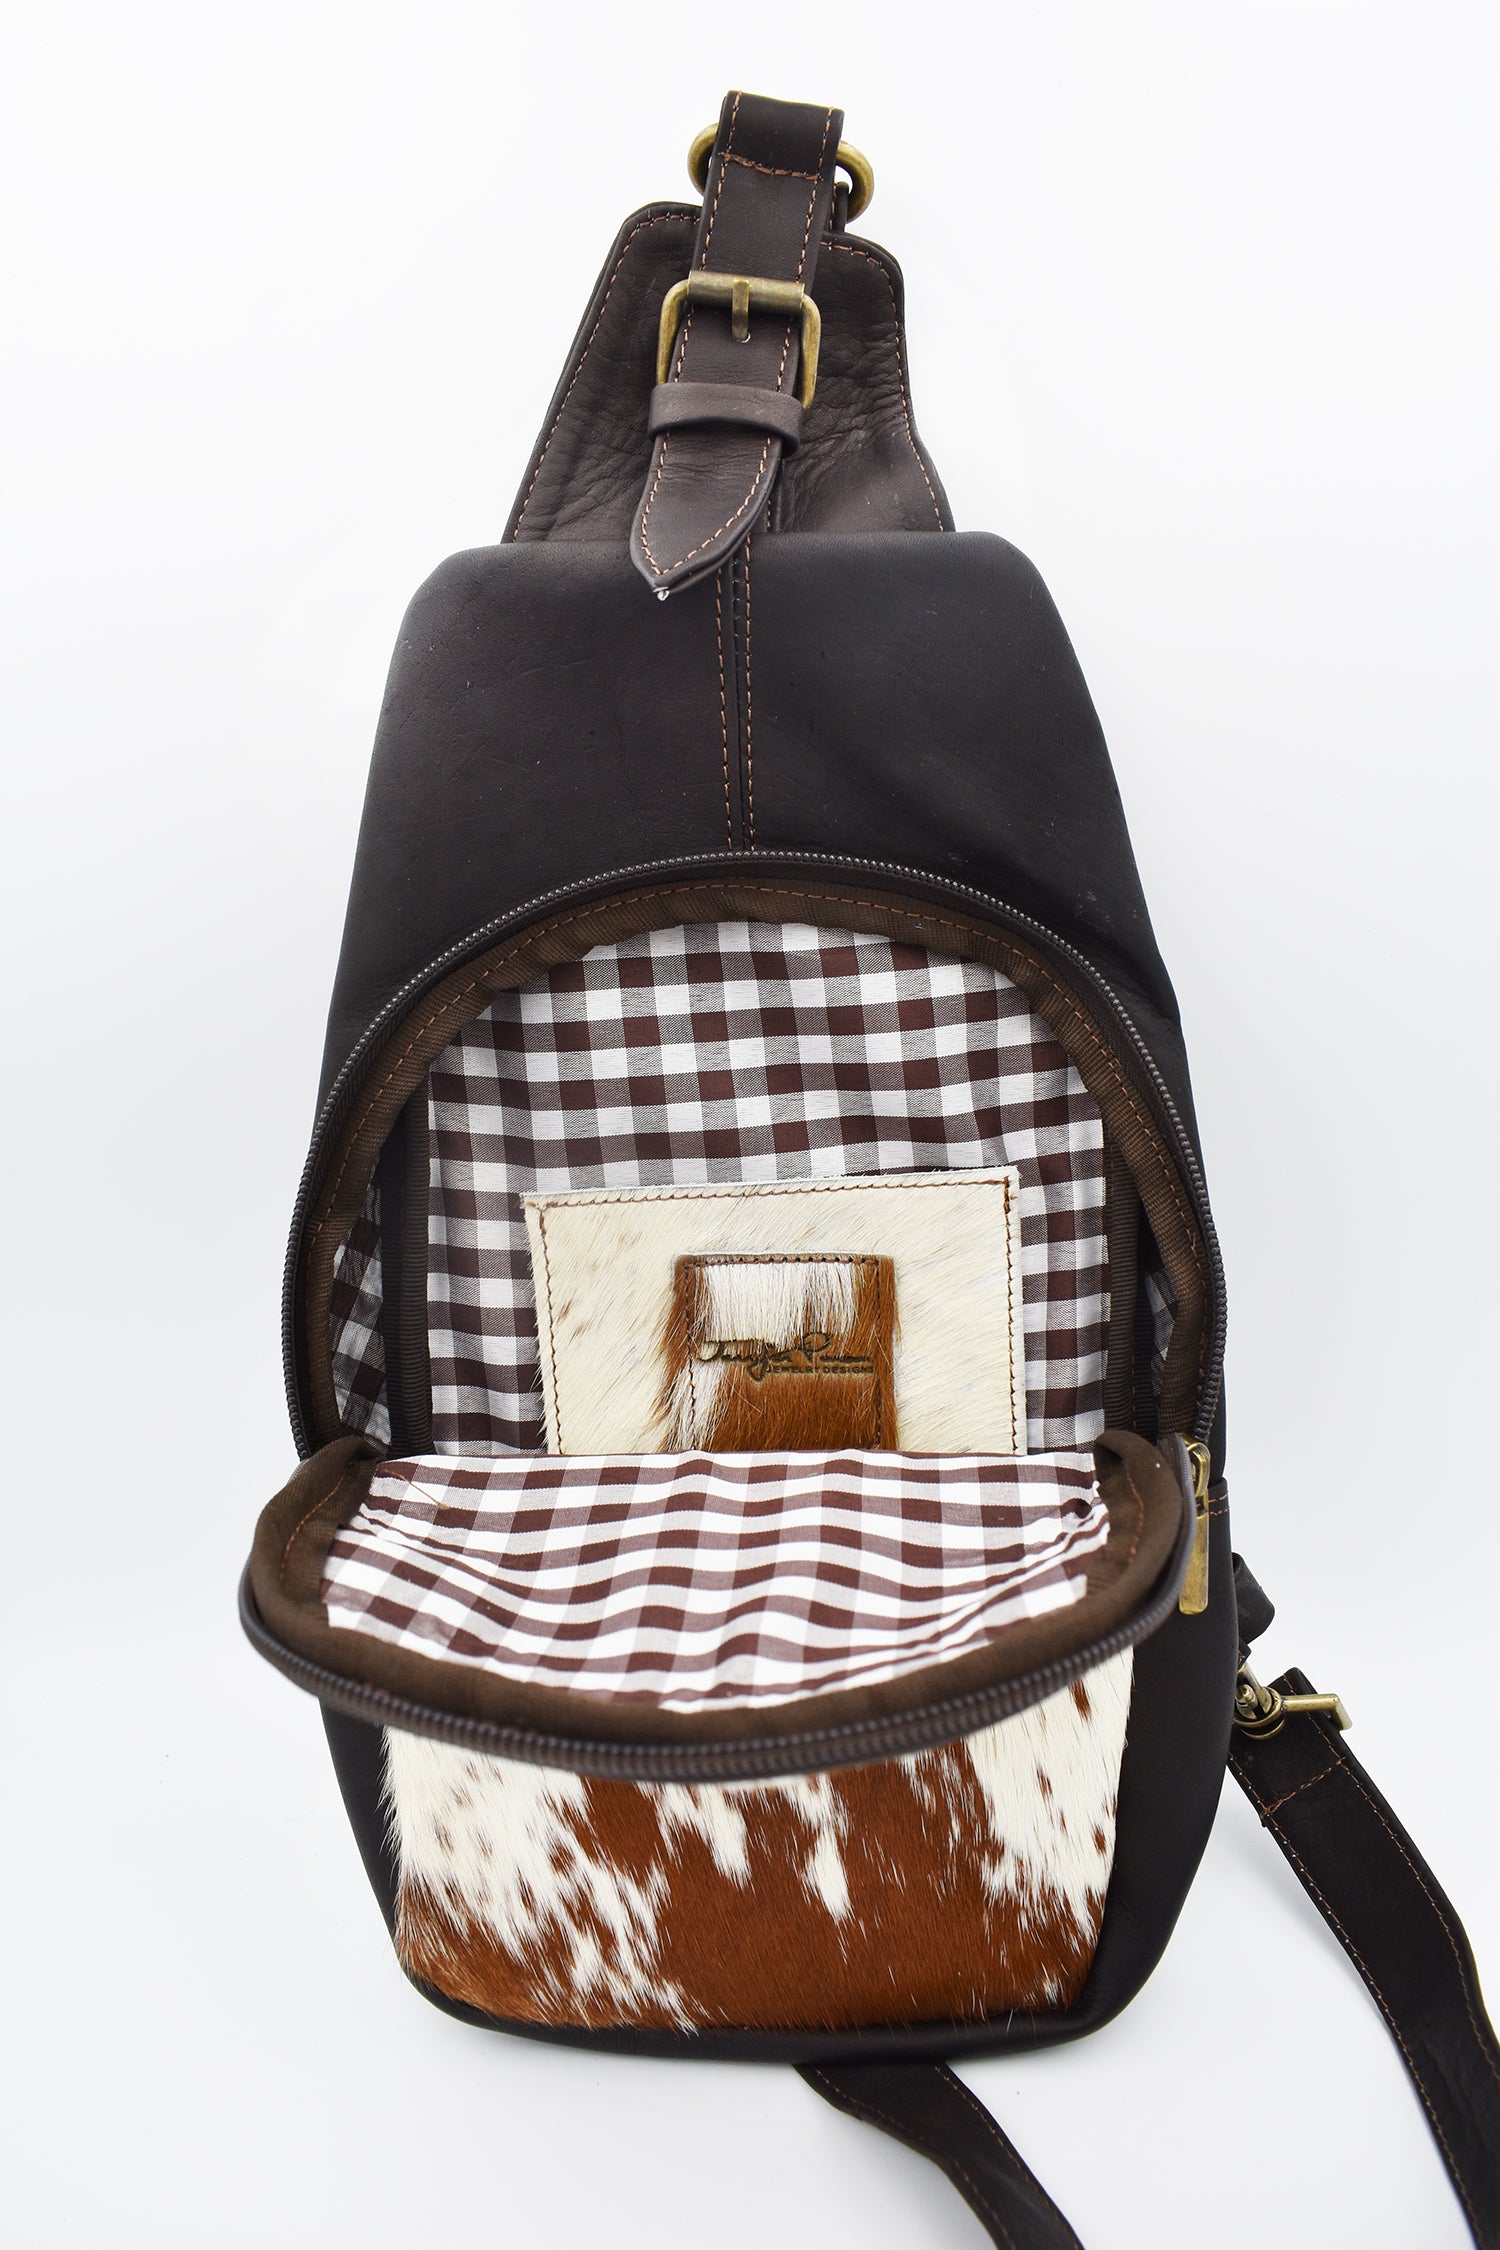 Sling, Off Shoulder Italian Leather with Brown and White  Spotted Cowhide Leather Bag